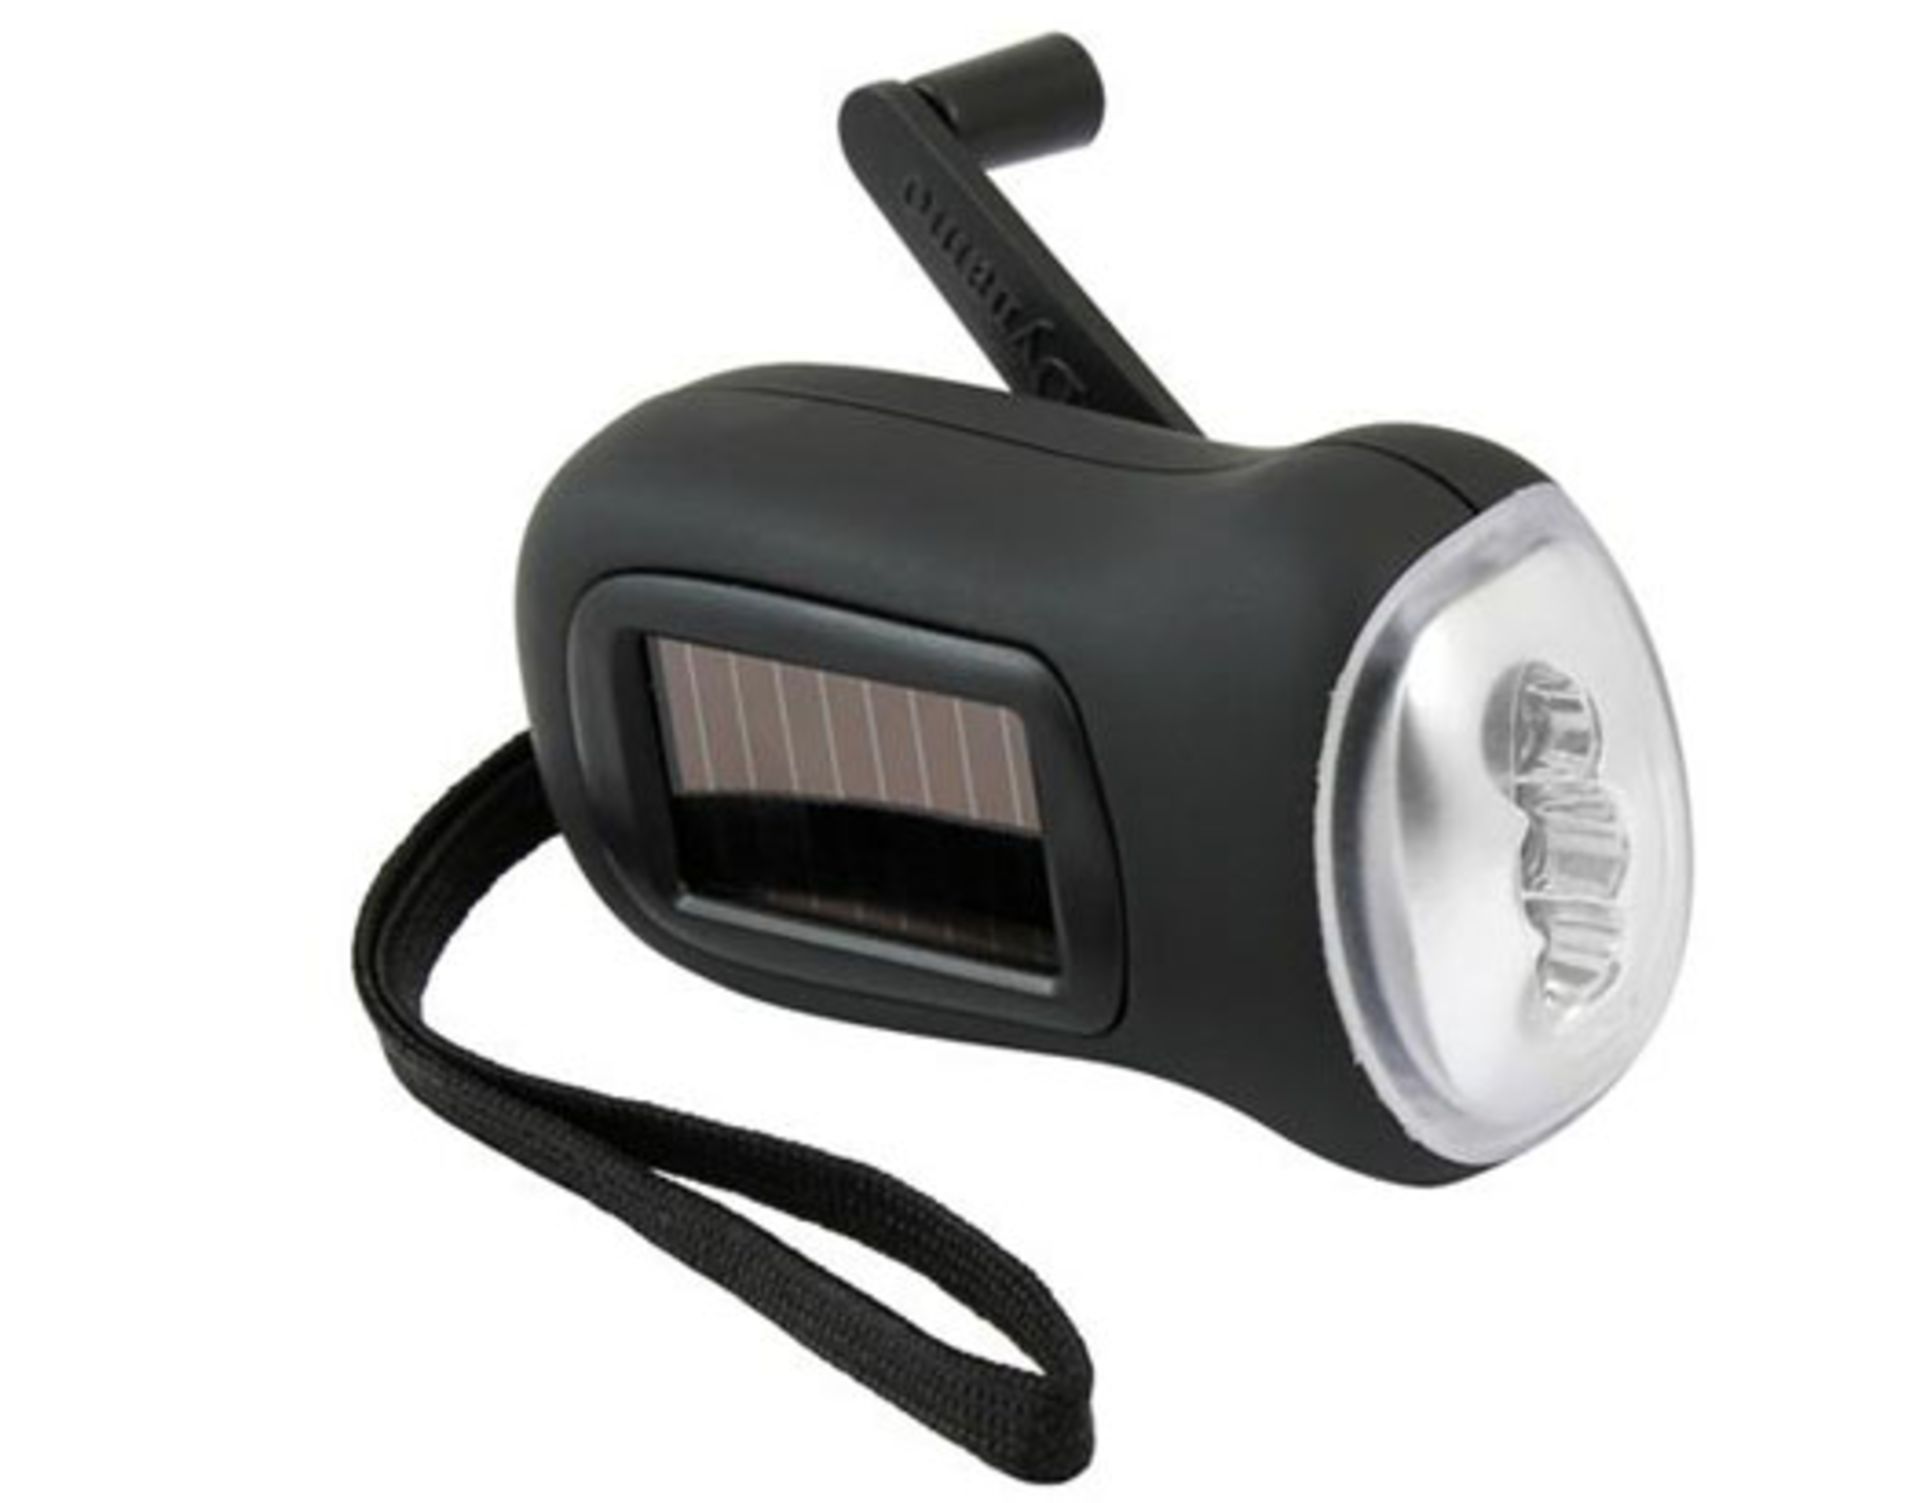 V *TRADE QTY* Brand New 3 LED Wind Up Solar Torch X 12 Bid price to be multiplied by Twelve